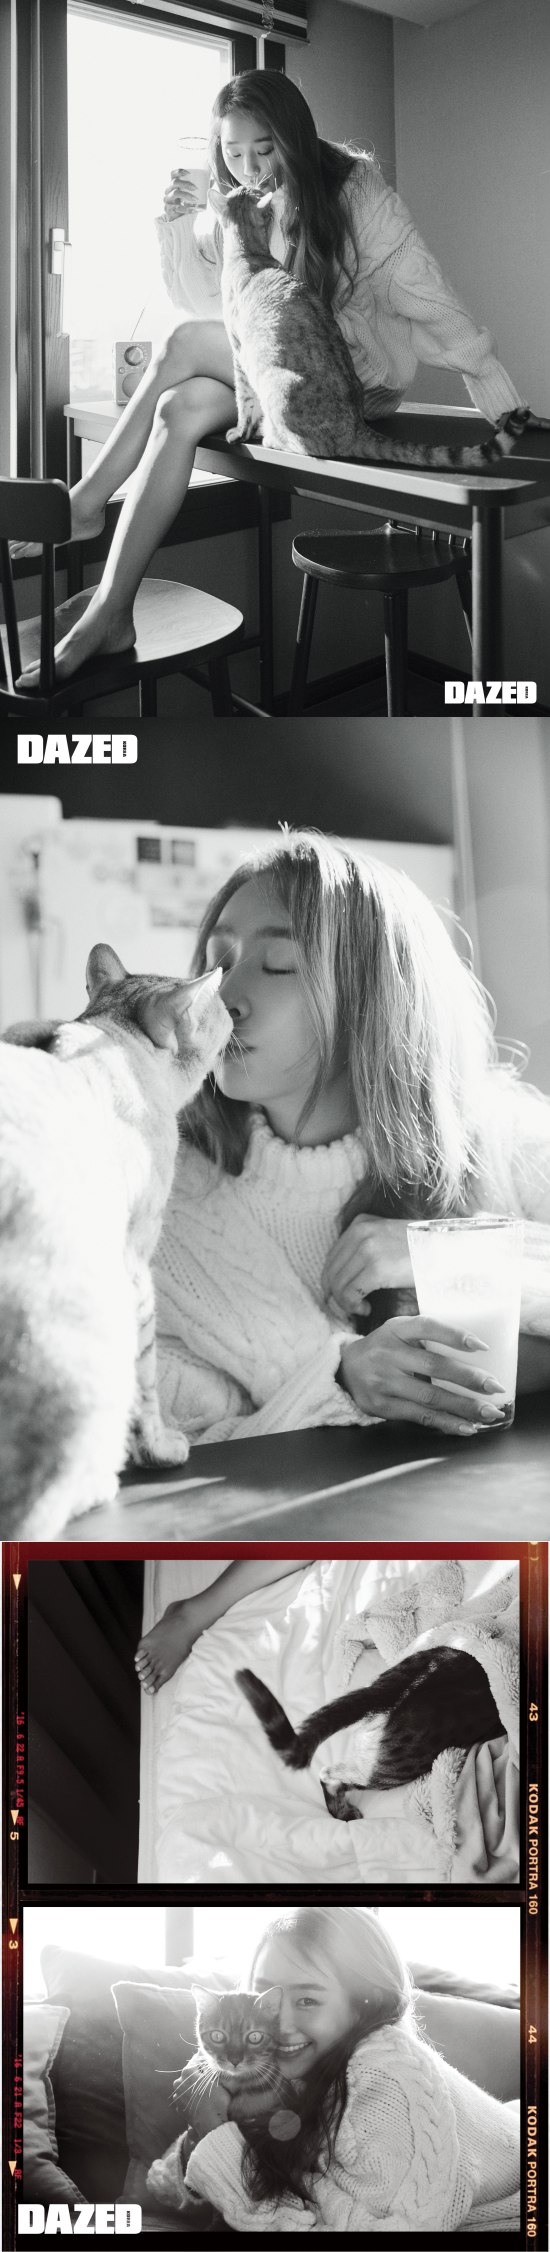 Fashion magazine Days released a picture of Lee Su-hyun Hyolyns affection for his companion.Lee Su-hyun Hyolyn, who is preparing for the second new song of the Hyolyn project, is an animal lover who is leading the animal protection group.Hyolyn participated in the Art Collaboration #MyCat campaign of Daysd and Paul B & B manufacturing bottes, revealing her A Private War routine of spending time with her companions Reno, Lego and Simba at Hyolyns home.The # MyCat campaign was inspired by two cats and brand icons, Gypsy and Nanette, by Parisian emotional beauty brand Paul B & B manufacturing designer Sophie, and presented works that collaborated with various The Artists on Cat.As part of the campaign, the photos of Hyolyn and his companions were completed with works, and they were presented through My Love # MyCat, the first exhibition of Daysd and Paul B & B manufacturing botte held at the Future Society on the first floor of the Daysd building from December 9 to 15.In addition, the proceeds of Hyolyns works sold at the exhibition will be donated to the animal protection group Similar Stock in the name of the participating Artist, Paul B & B manufacturing botte, <Daysd>.Hyolyns pictures and campaigns can be found in the January 2020 issue of Daysd Korea, homepage, Instagram, and YouTube.Photo: Daysd